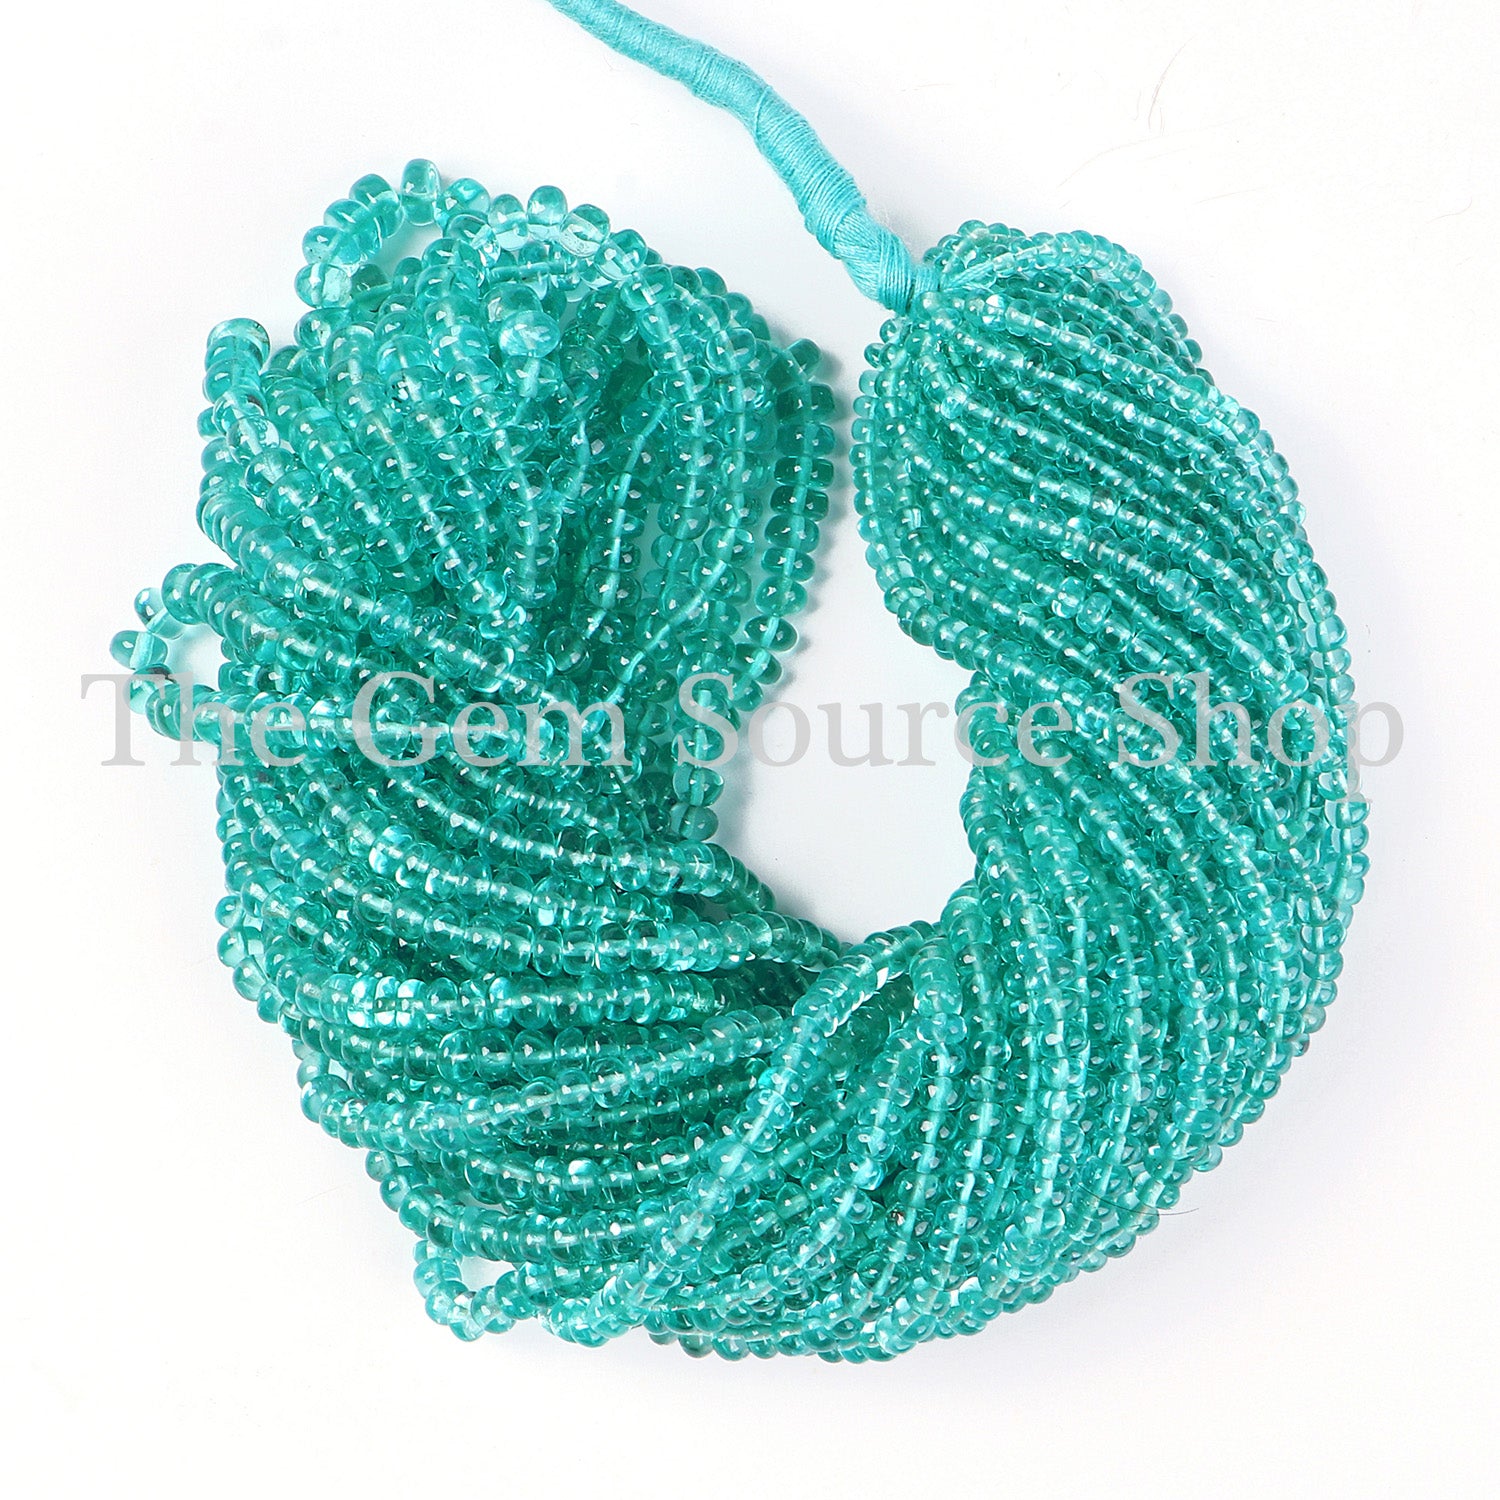 Apatite Beads, Apatite Smooth Rondelle Beads, Plain Apatite Beads, Apatite Gemstone Beads